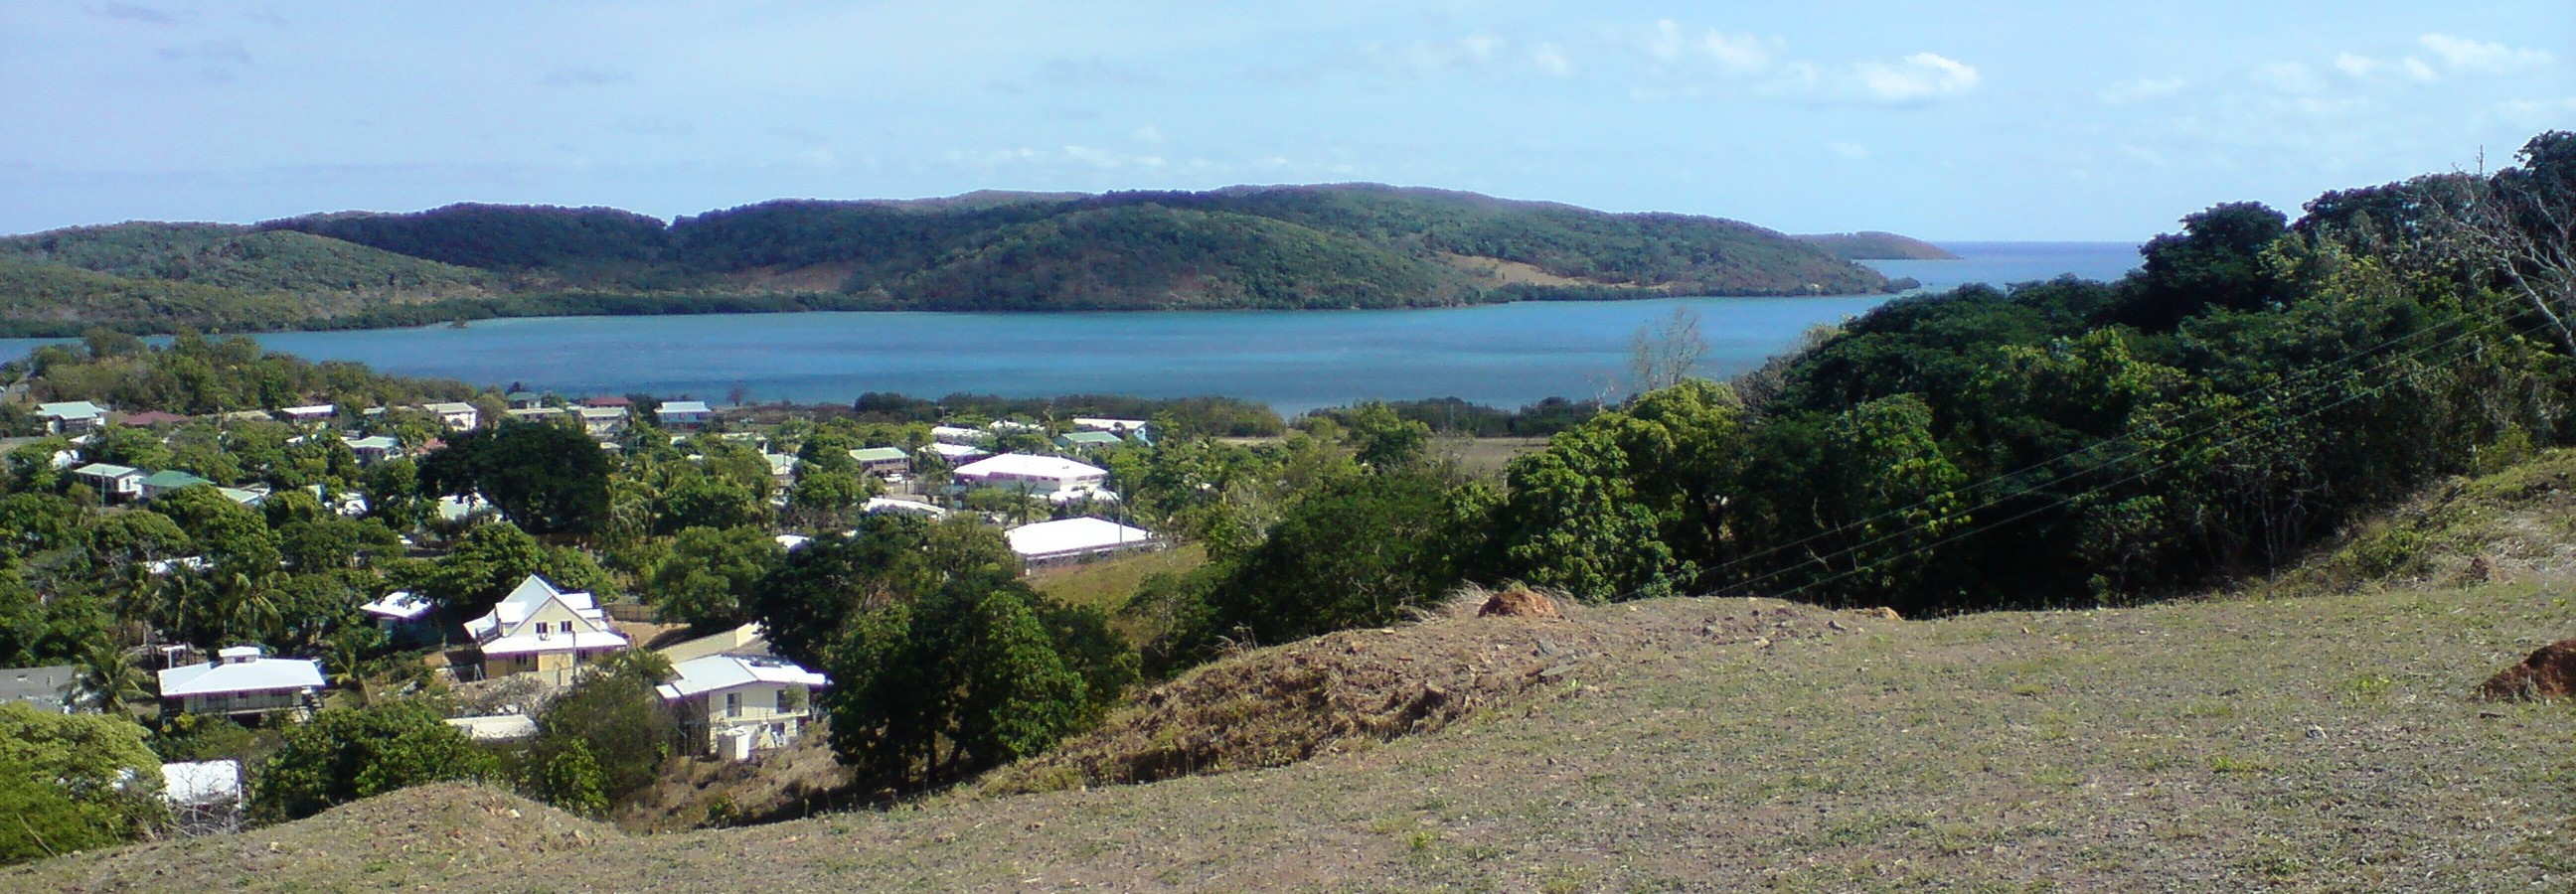 Torres Strait Islanders to file UN human rights claim against Australia over climate change